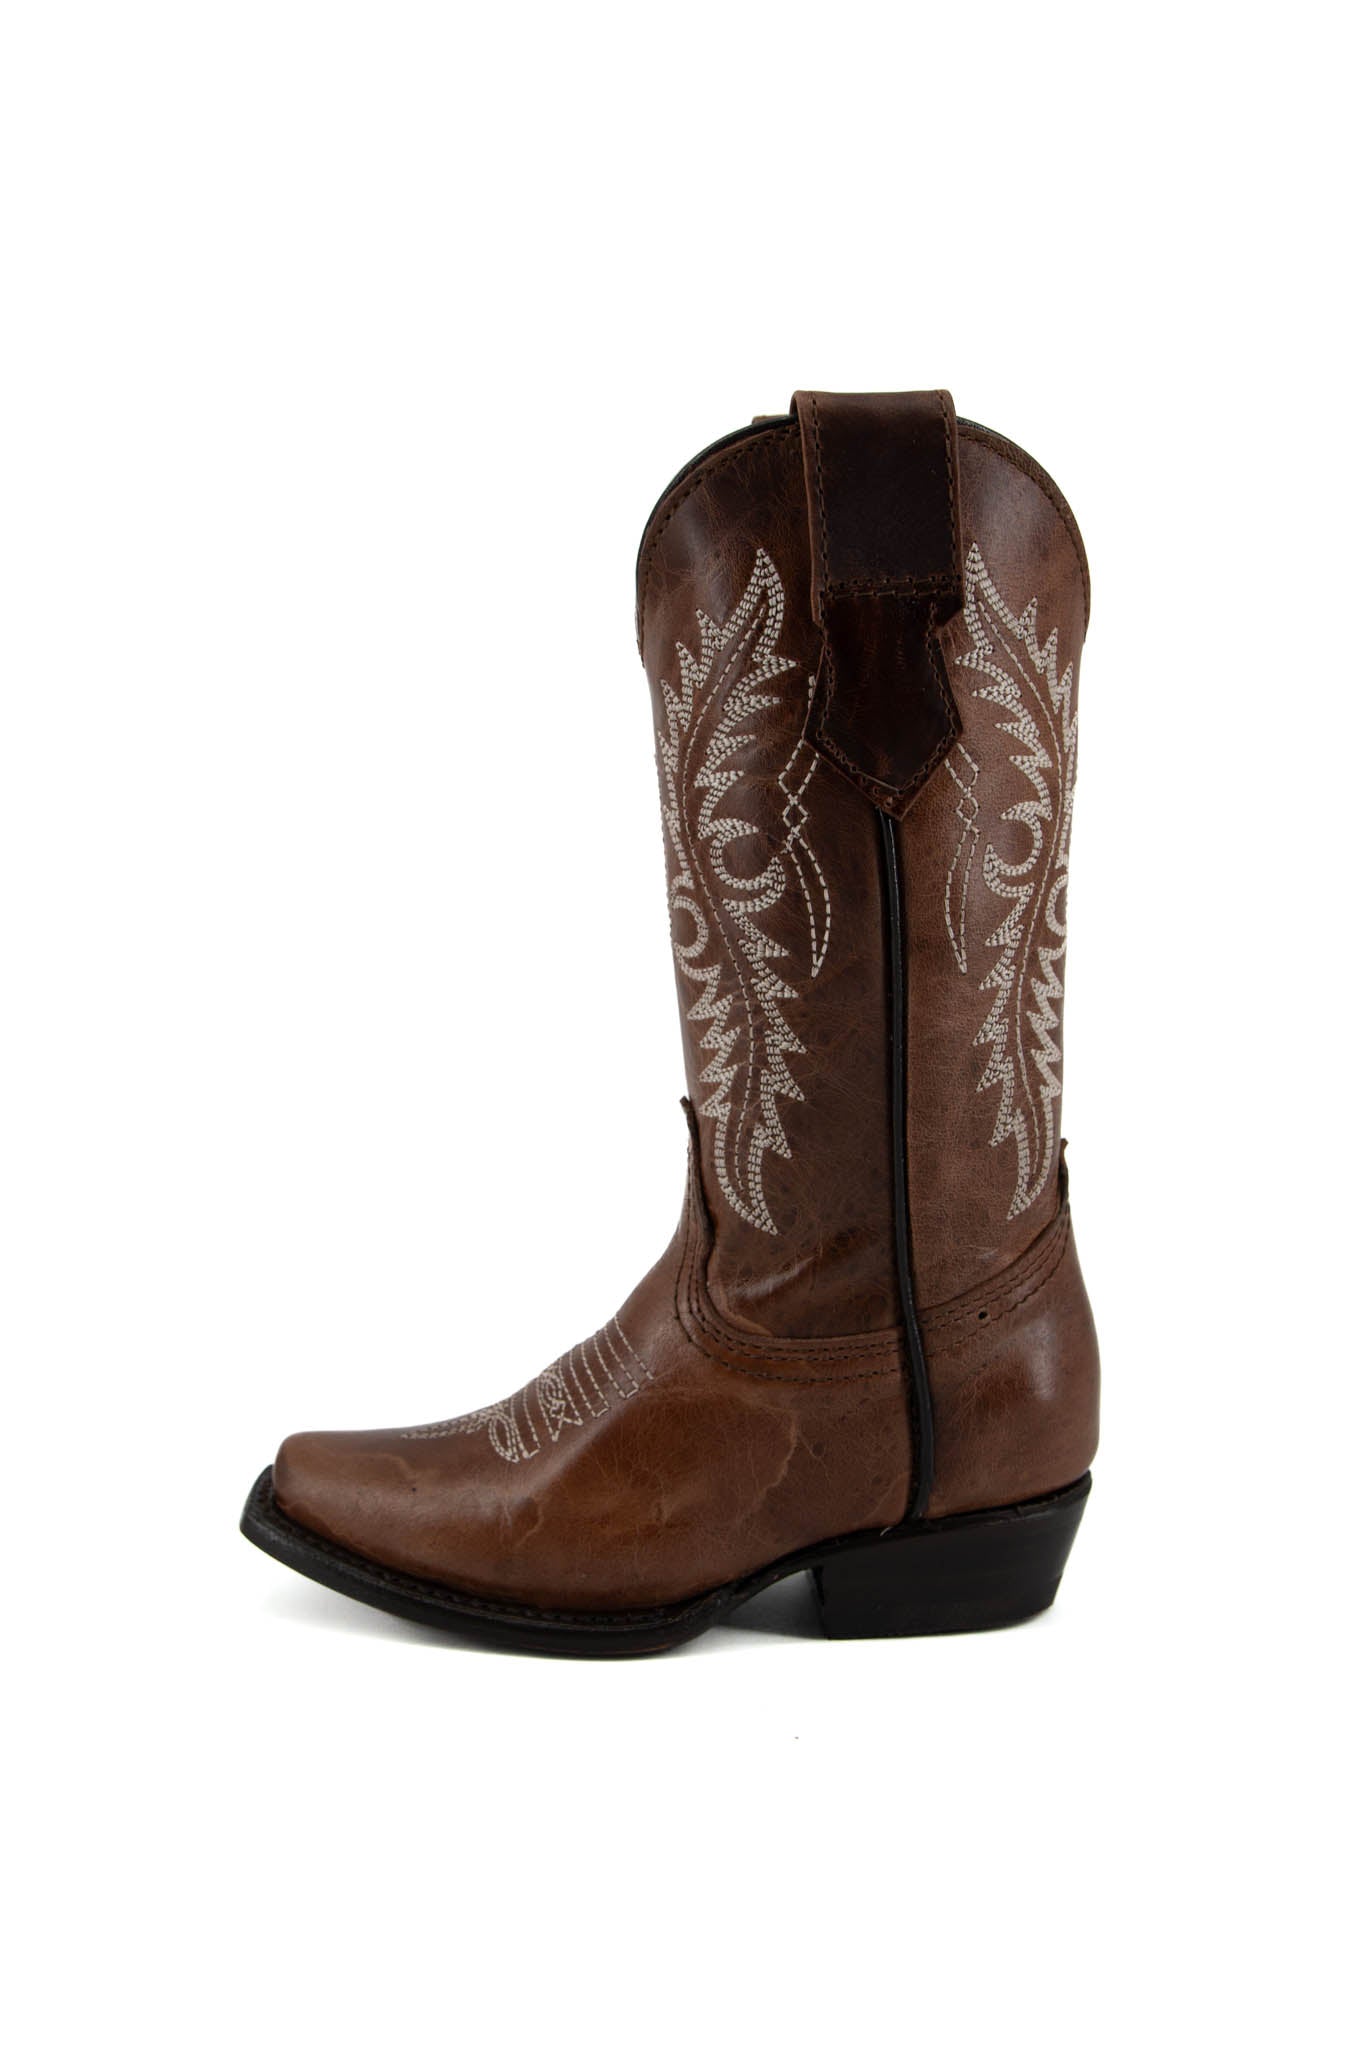 Little Girl Country Boots